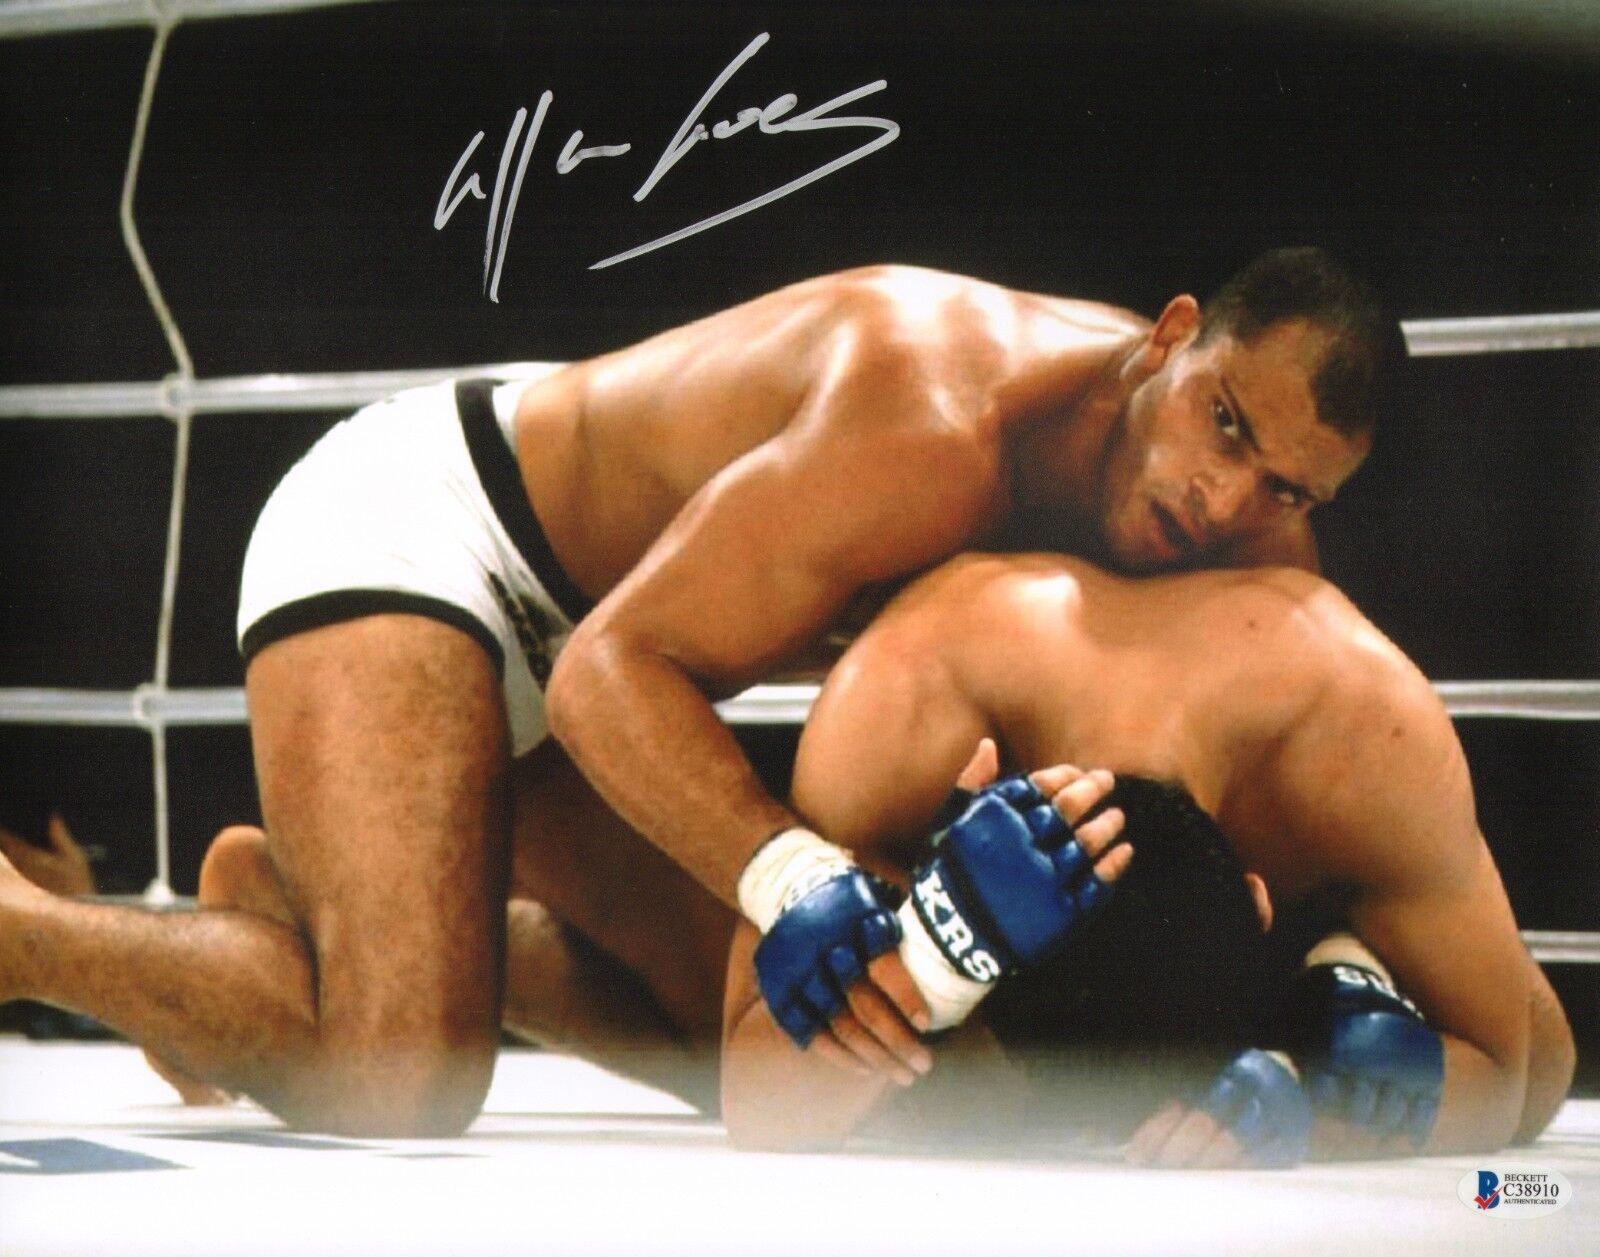 Allan Goes Signed 11x14 Photo Poster painting BAS Beckett COA UFC Pride FC 9 Picture Autograph 2